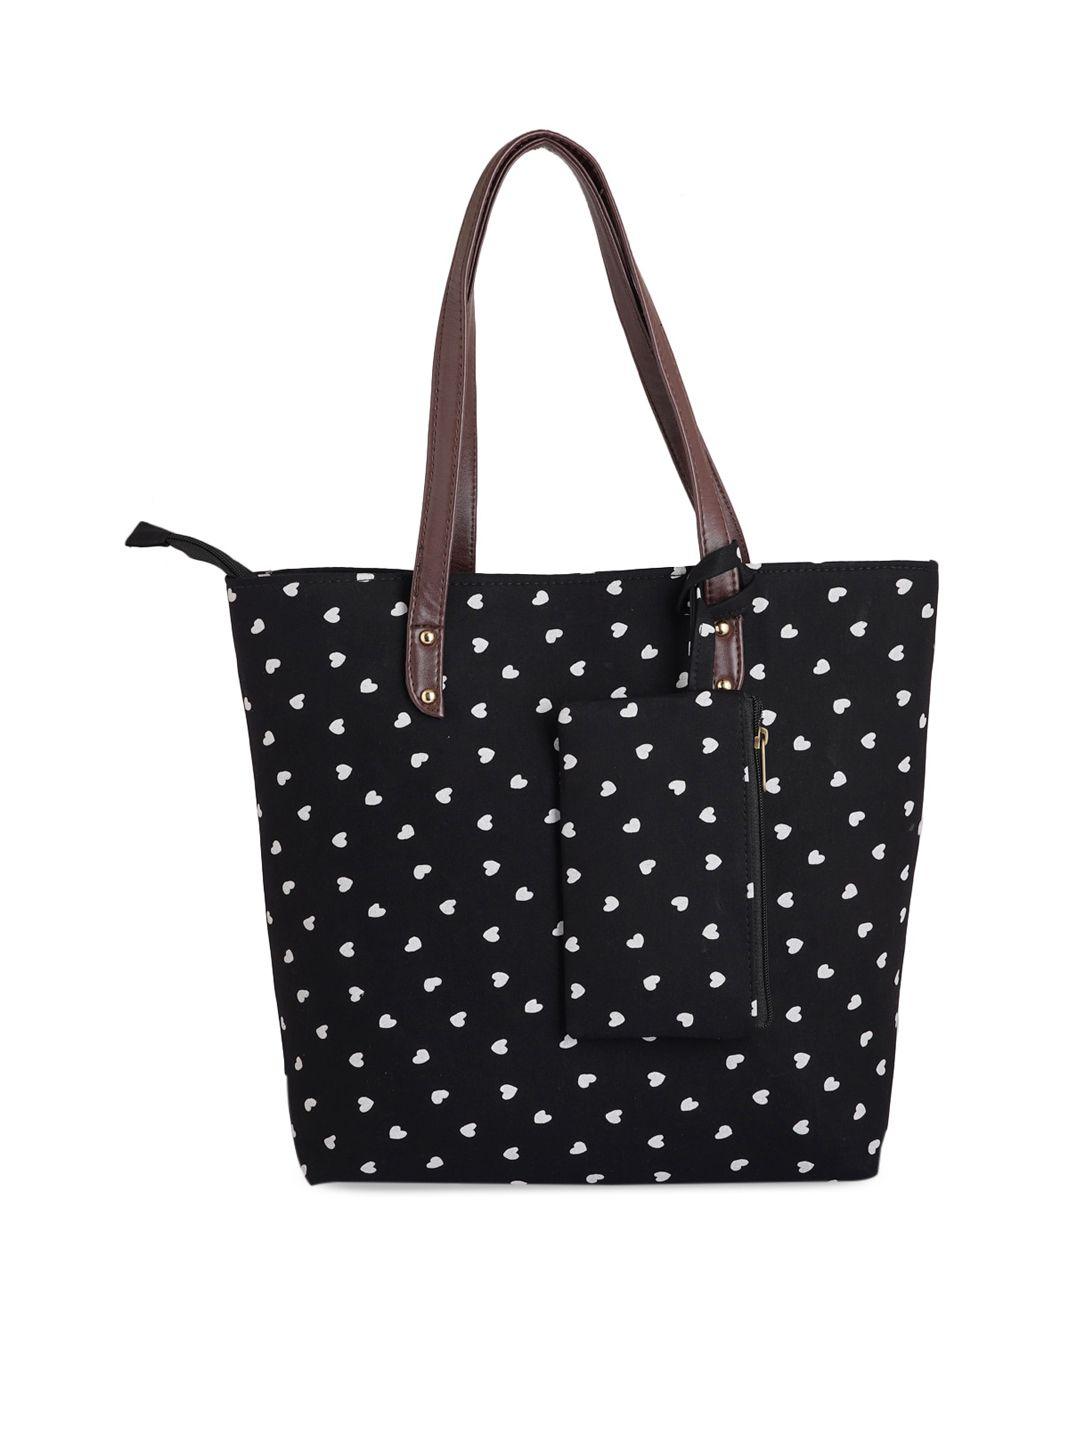 style shoes black printed oversized shopper tote bag